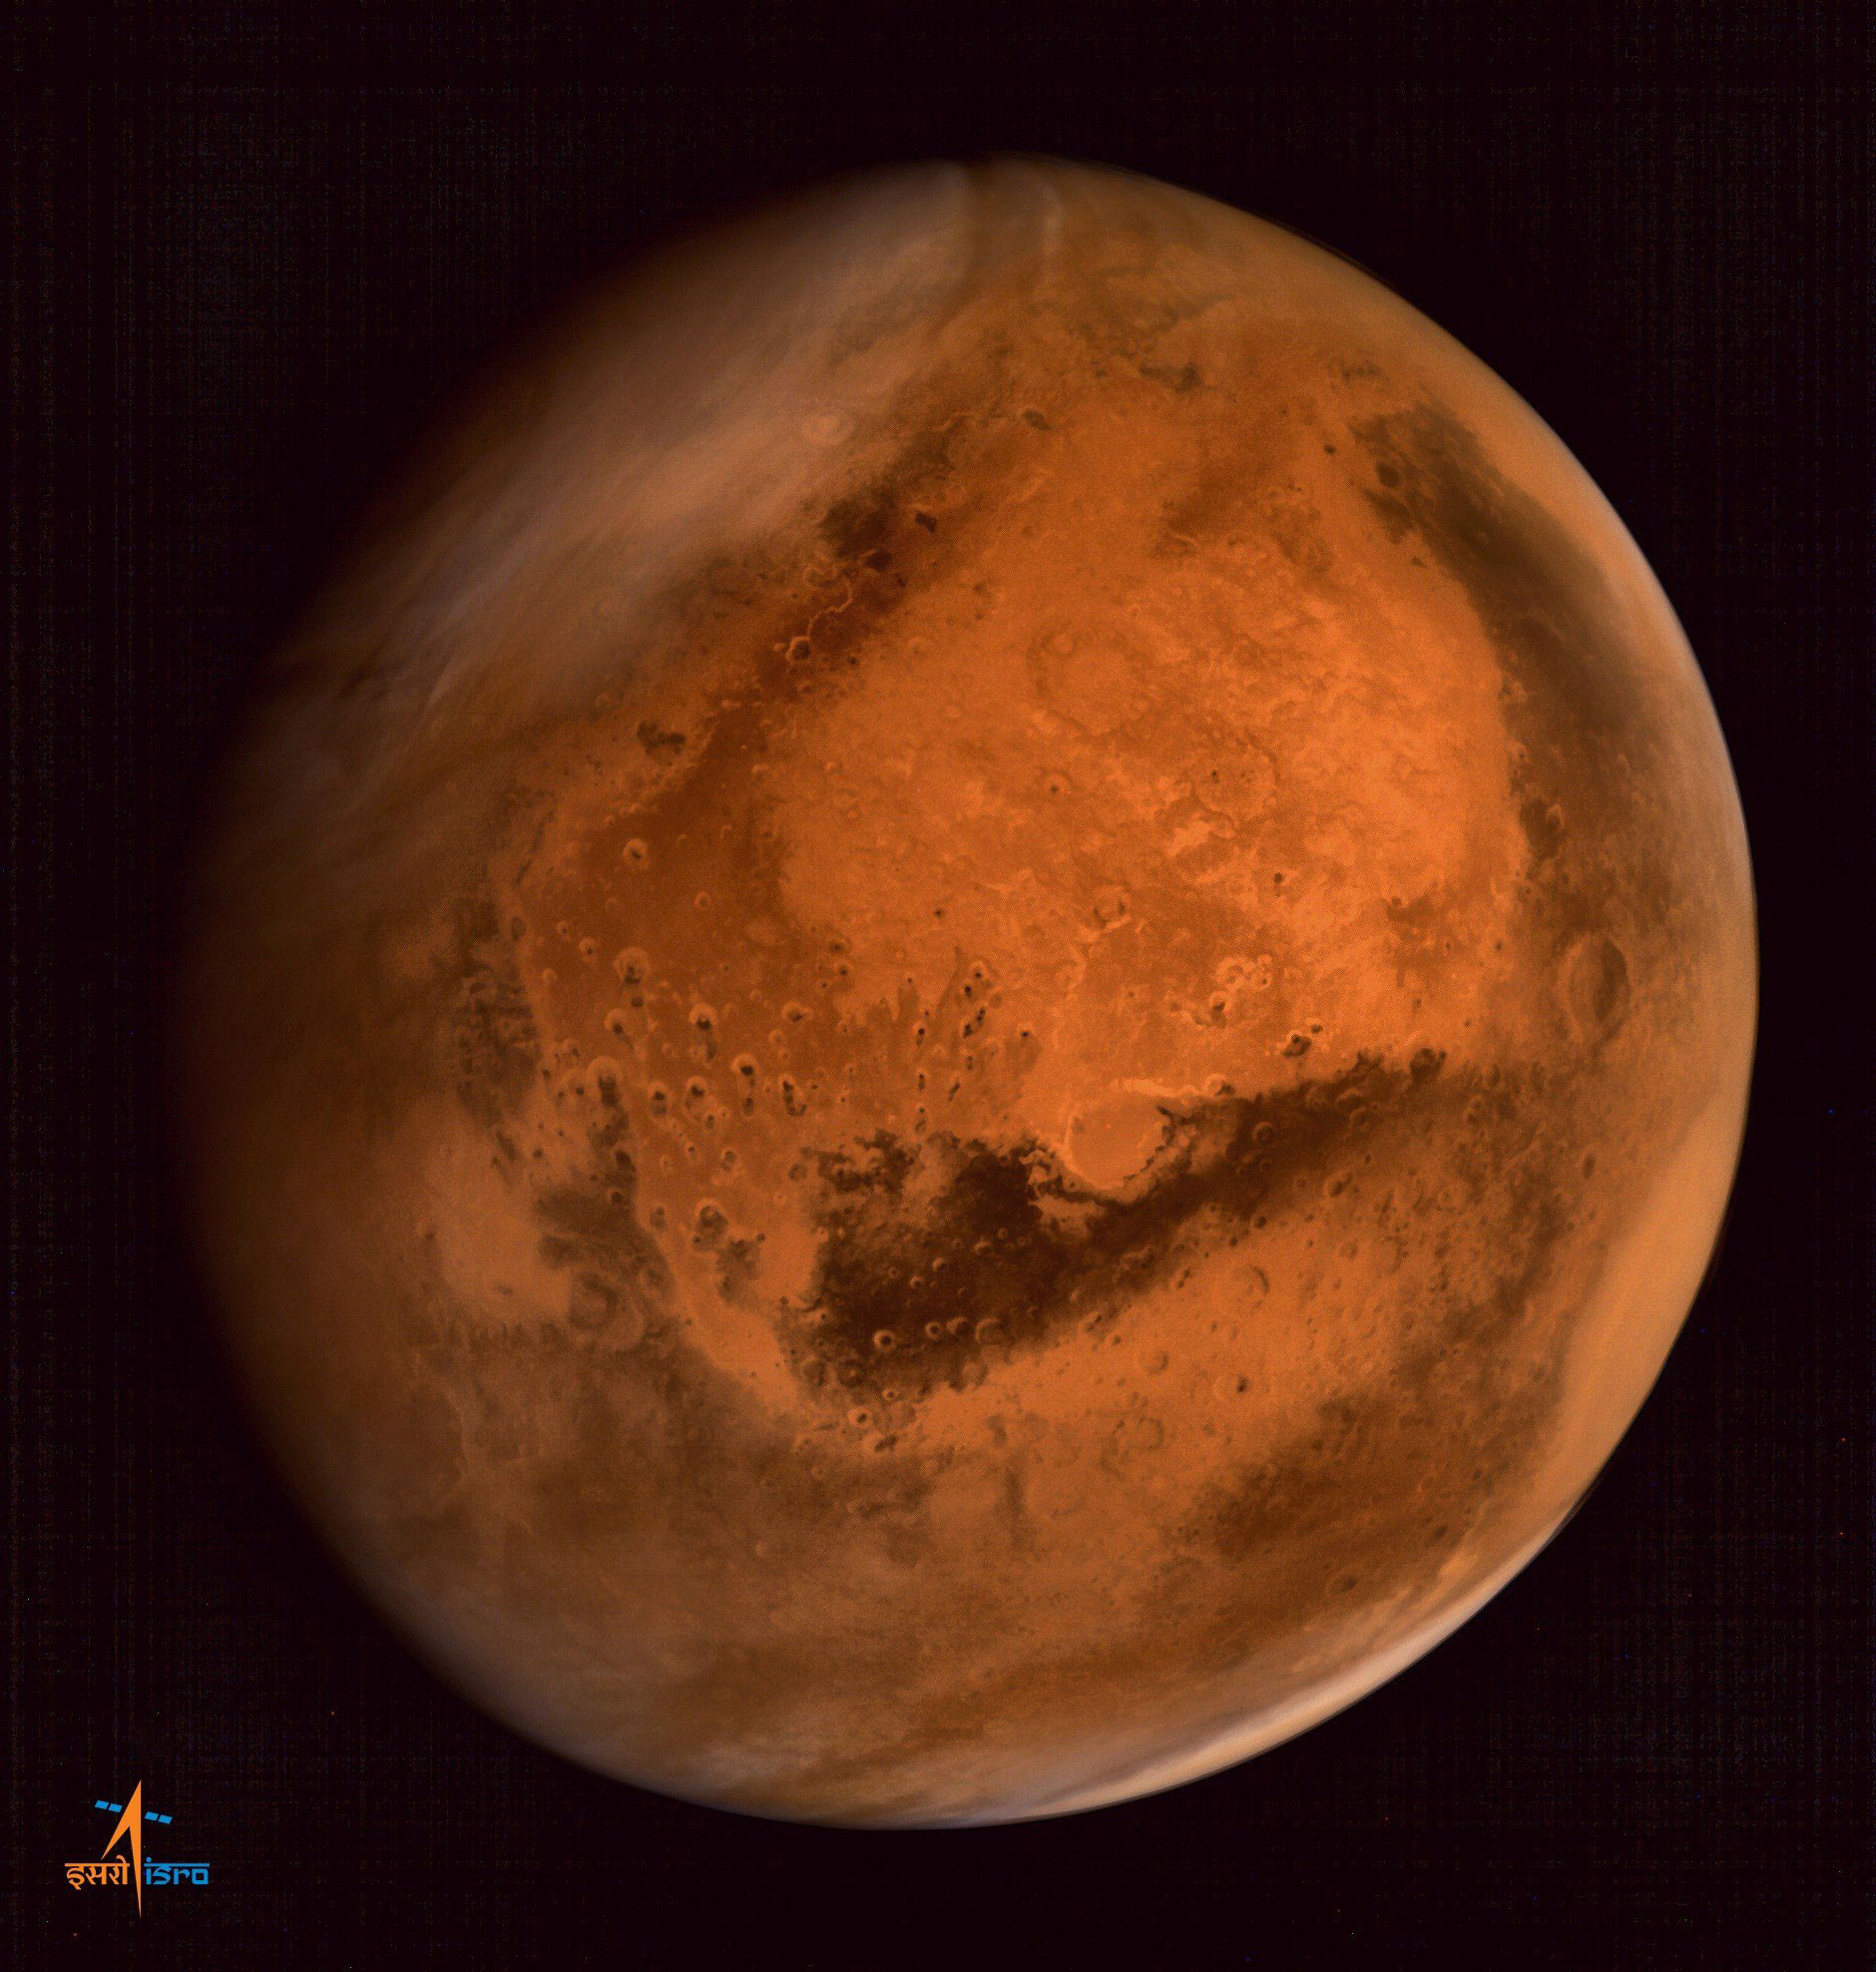 Mars photographed by the ISRO Mars Orbiter Mission (MOM) spacecraft on Sept. 30, 2014.